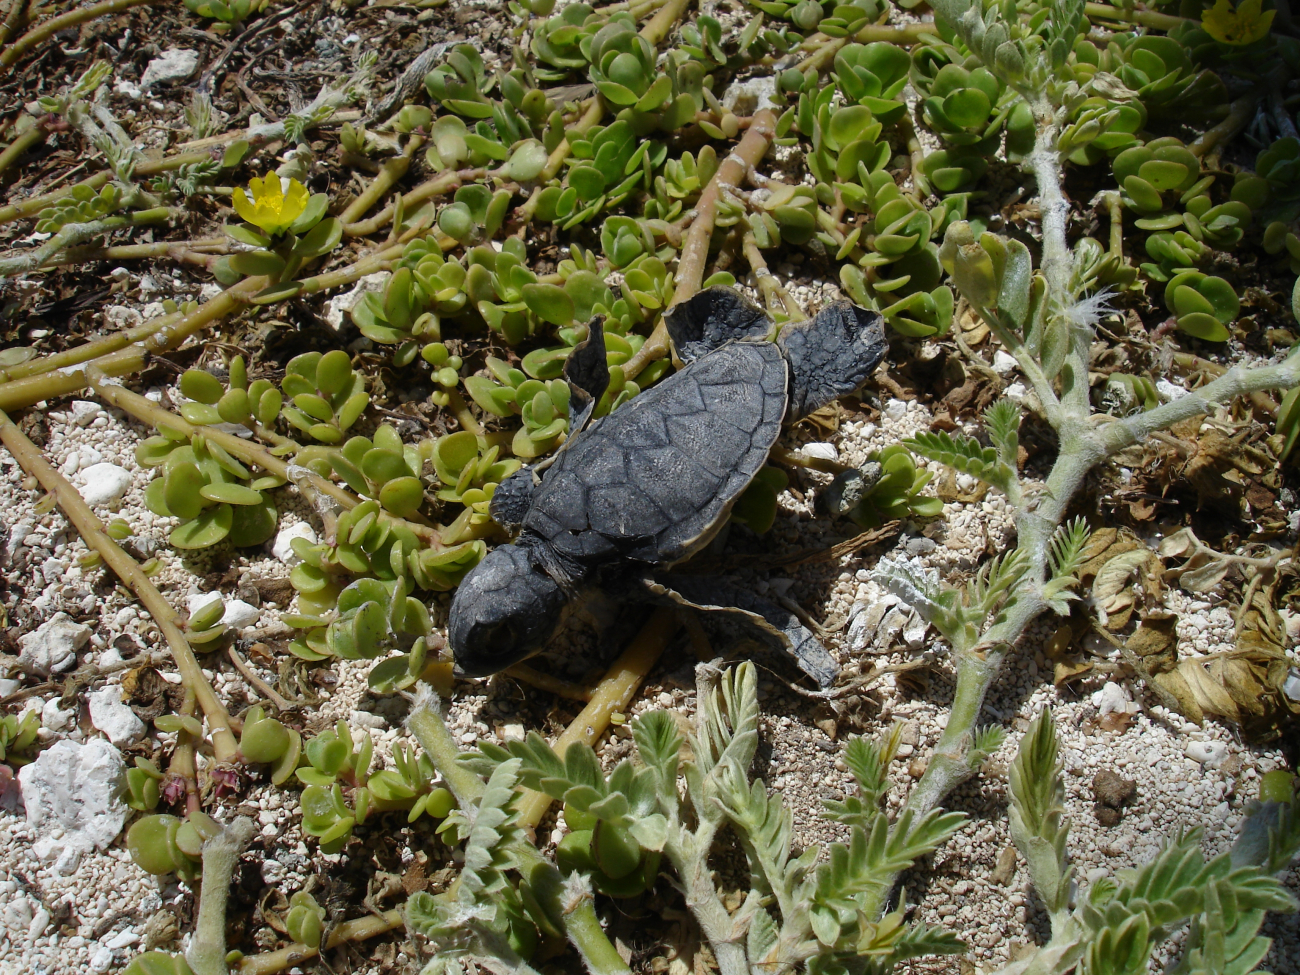 Dead turtle hatchling that made a wrong turn or was picked up and dropped by abird